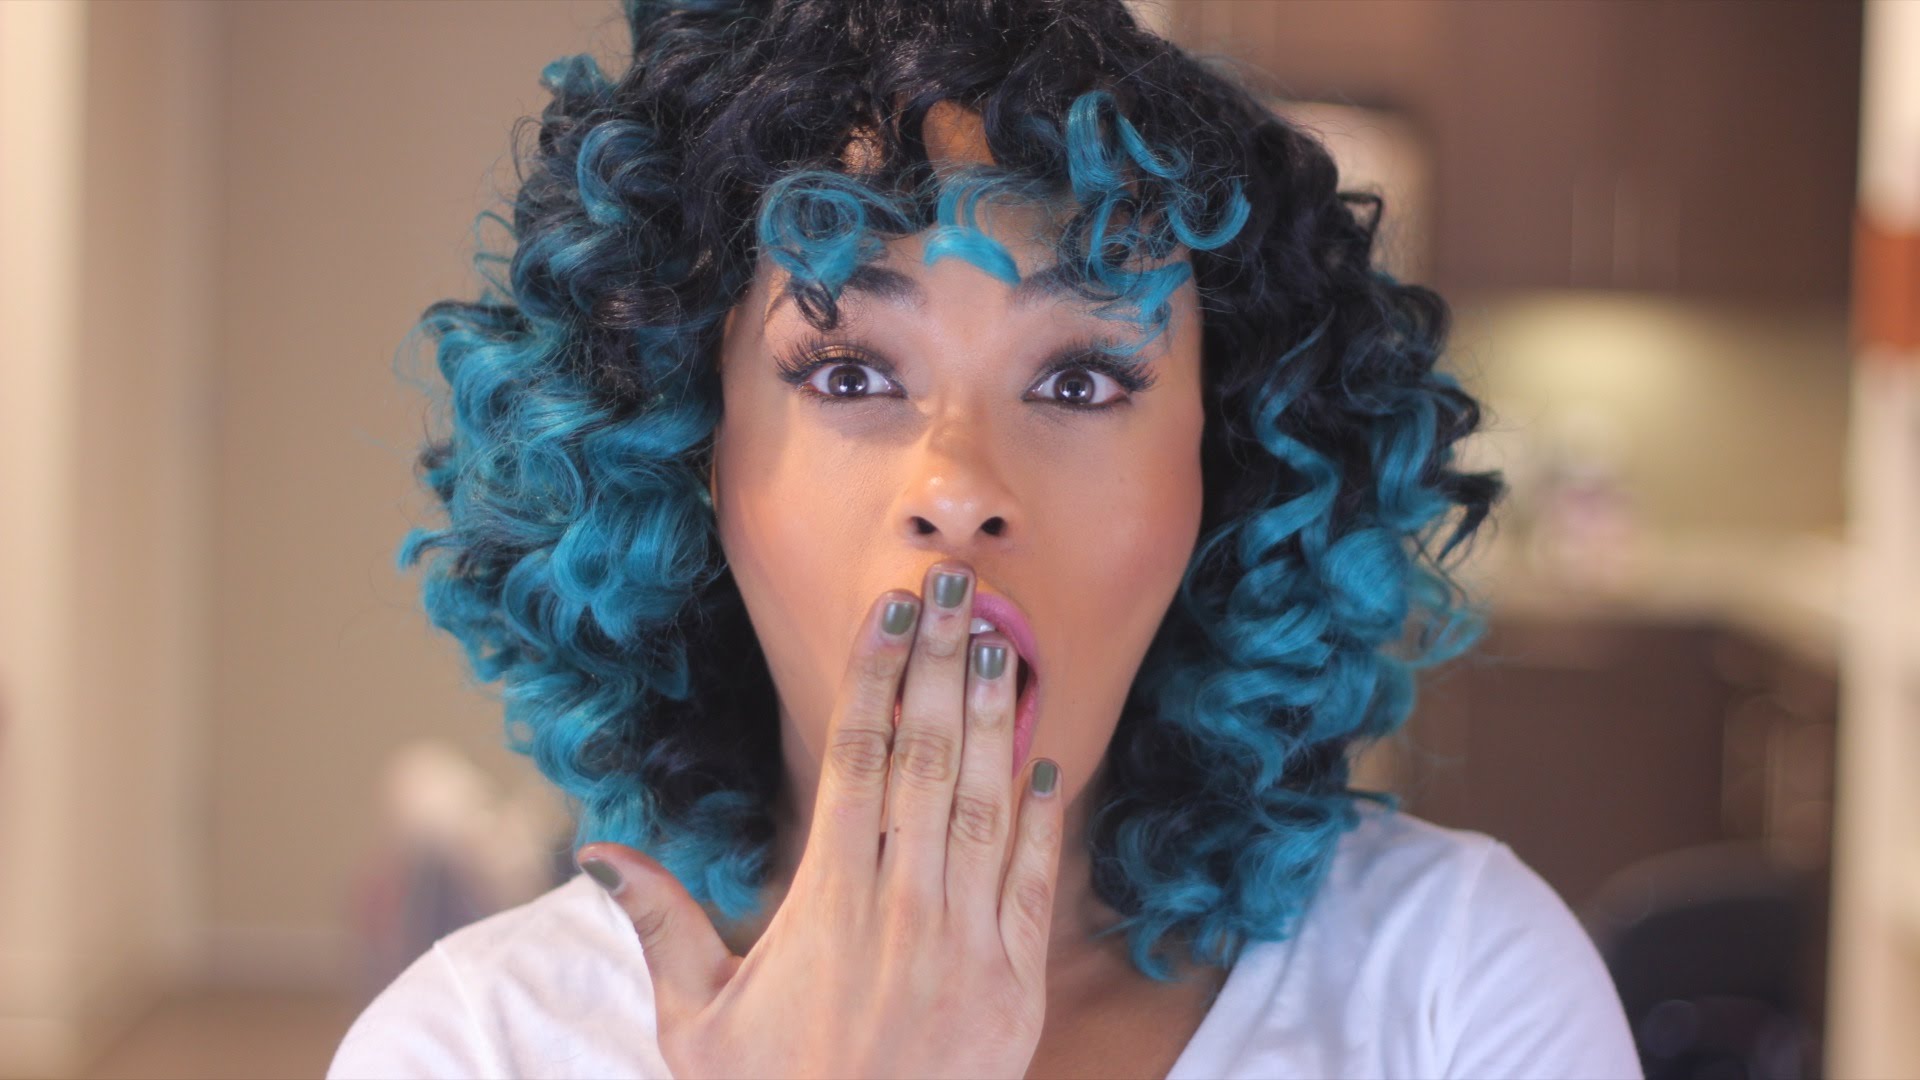 1. "Neon Blue Ombre Hair: 10 Stunning Examples to Inspire Your Next Look" - wide 11